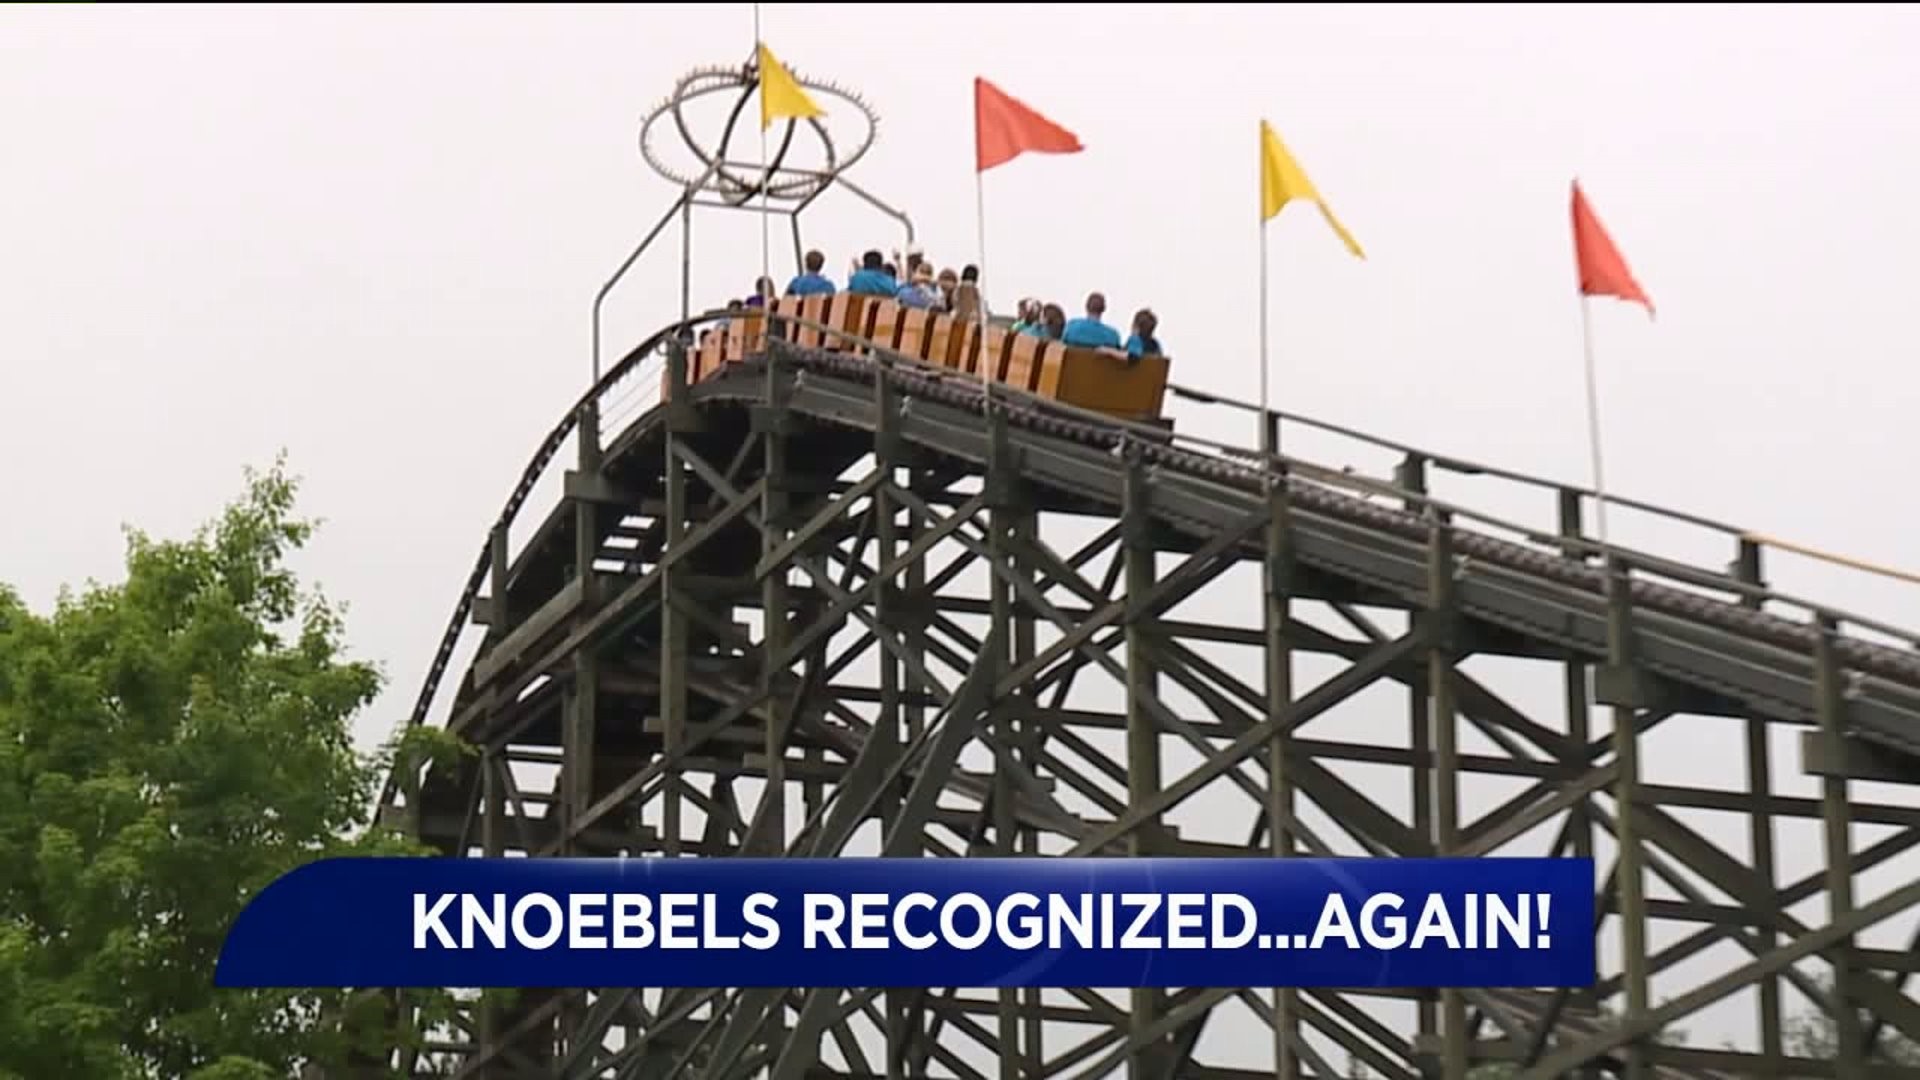 Another Award for Knoebels